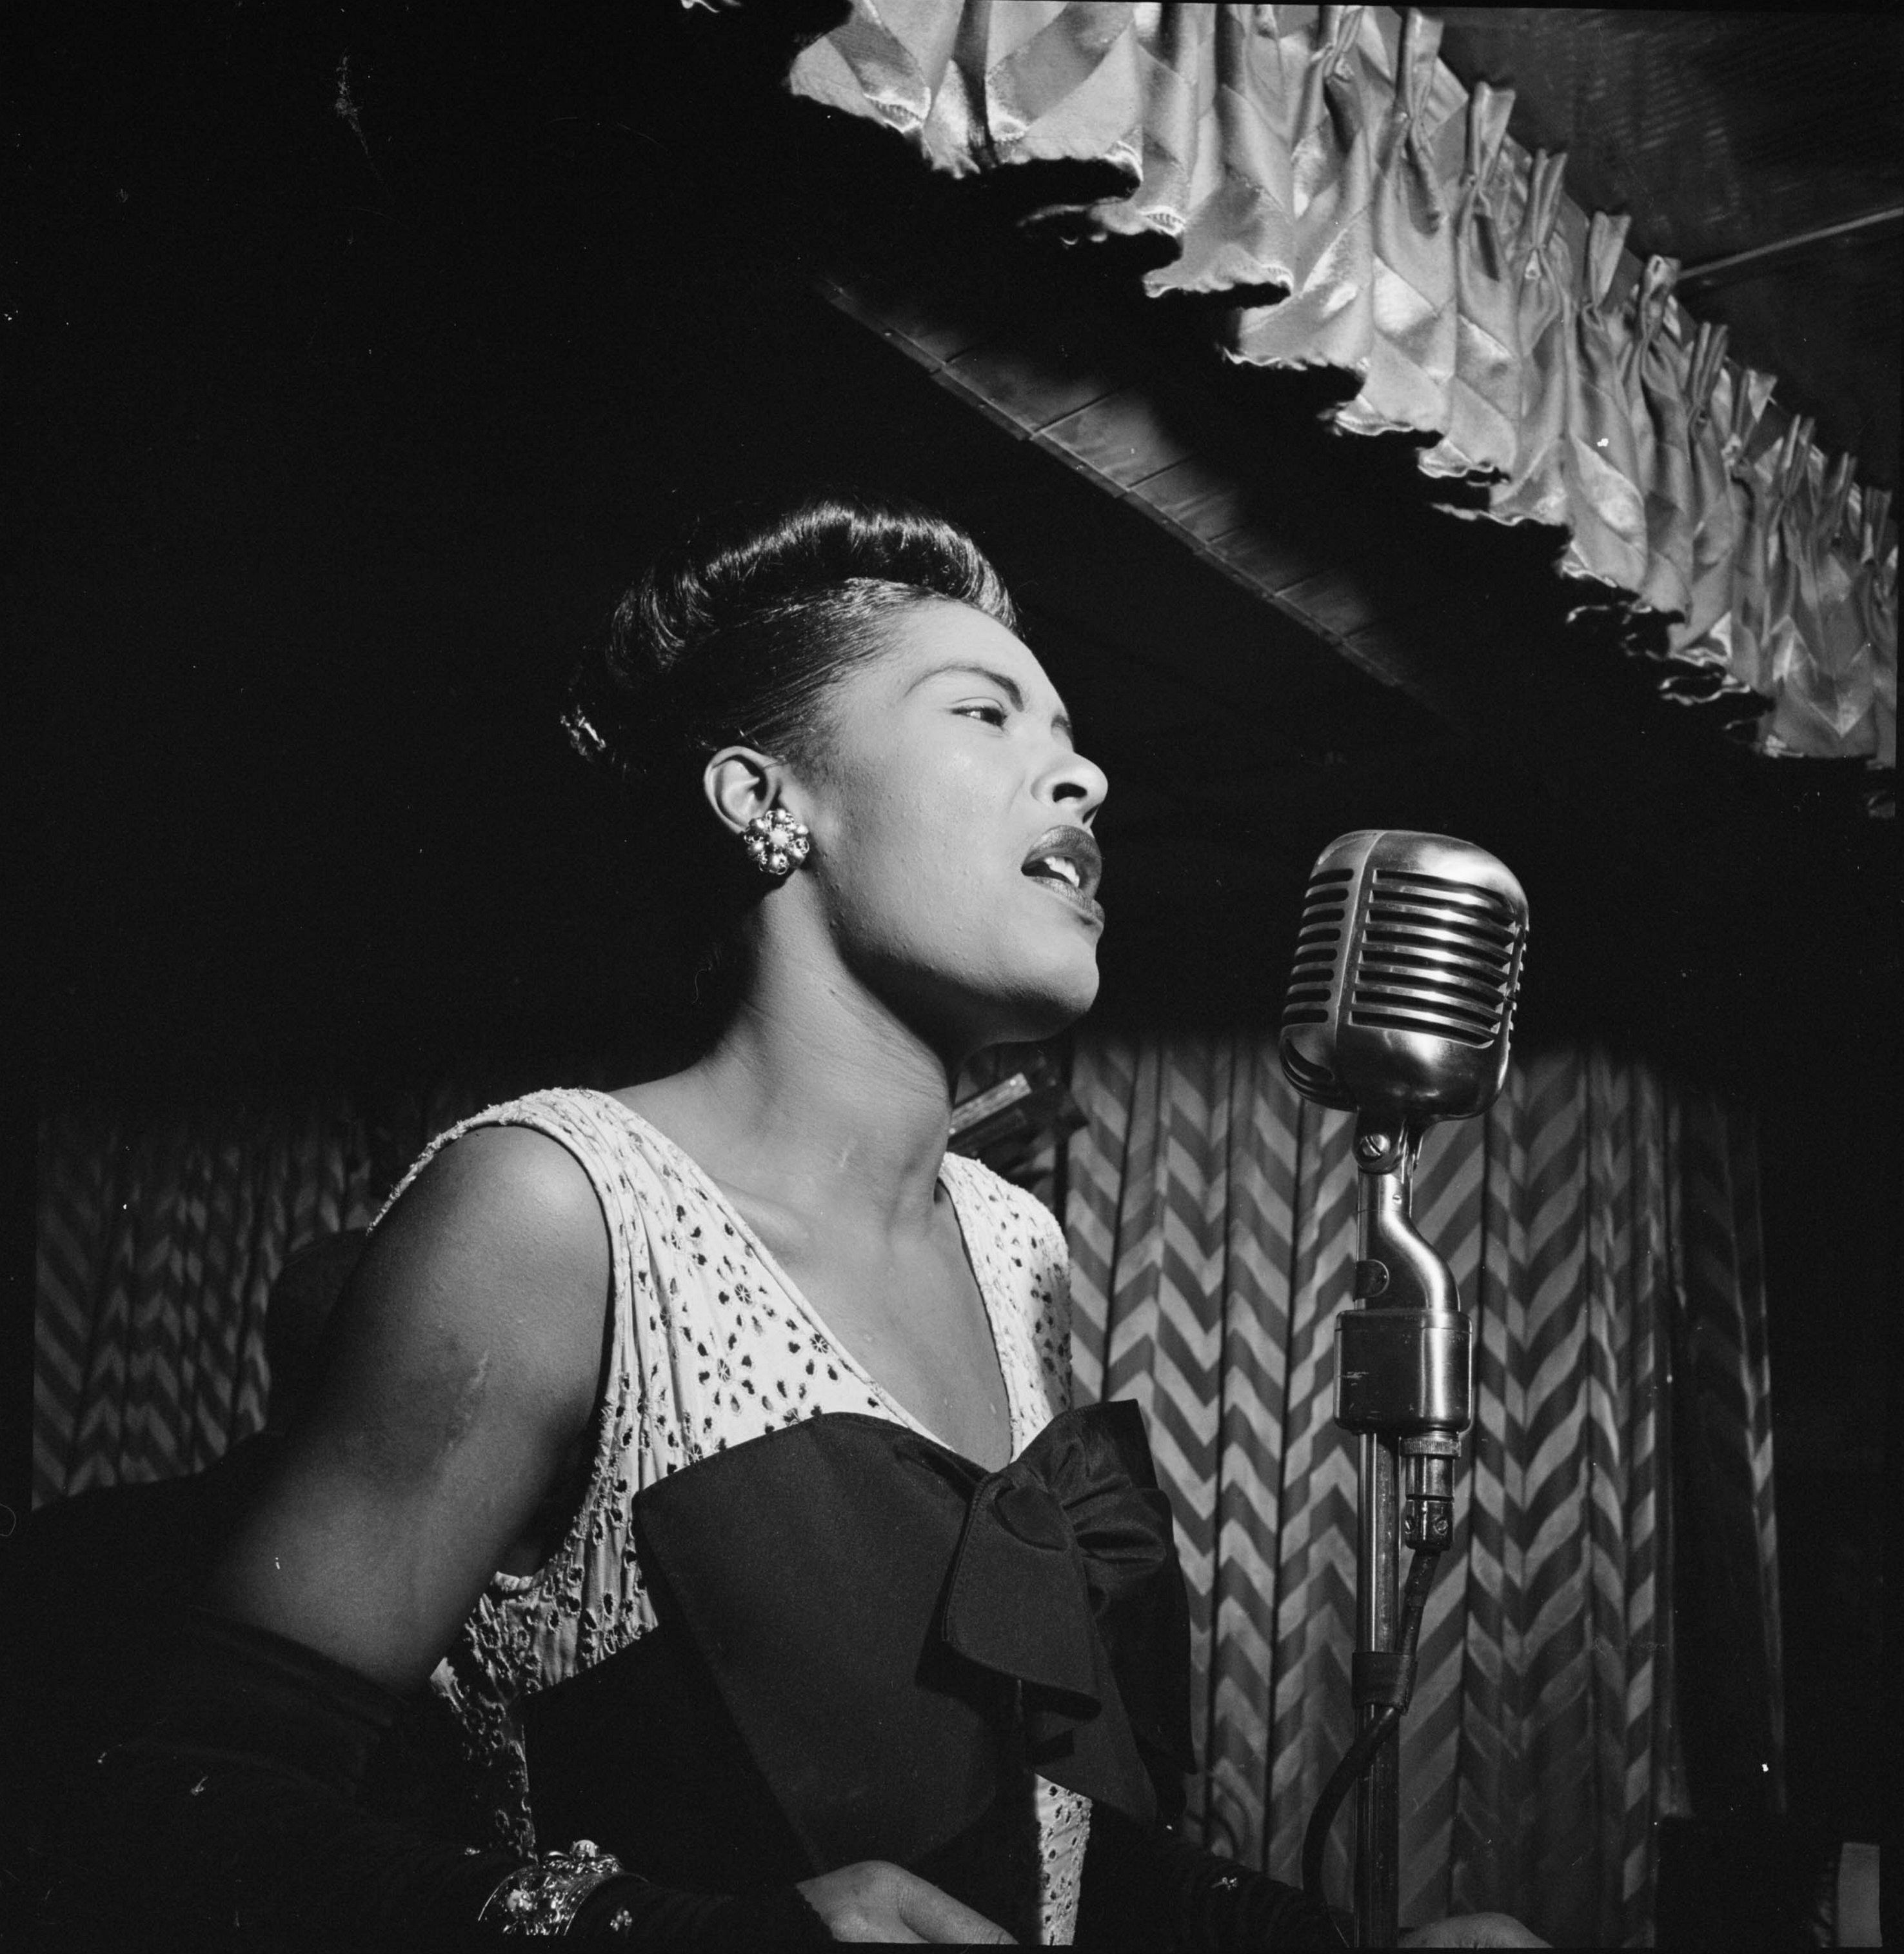 Billie Holiday (1915 - 1959) performing at the Club Downbeat in Manhattan. | Photo: Getty Images